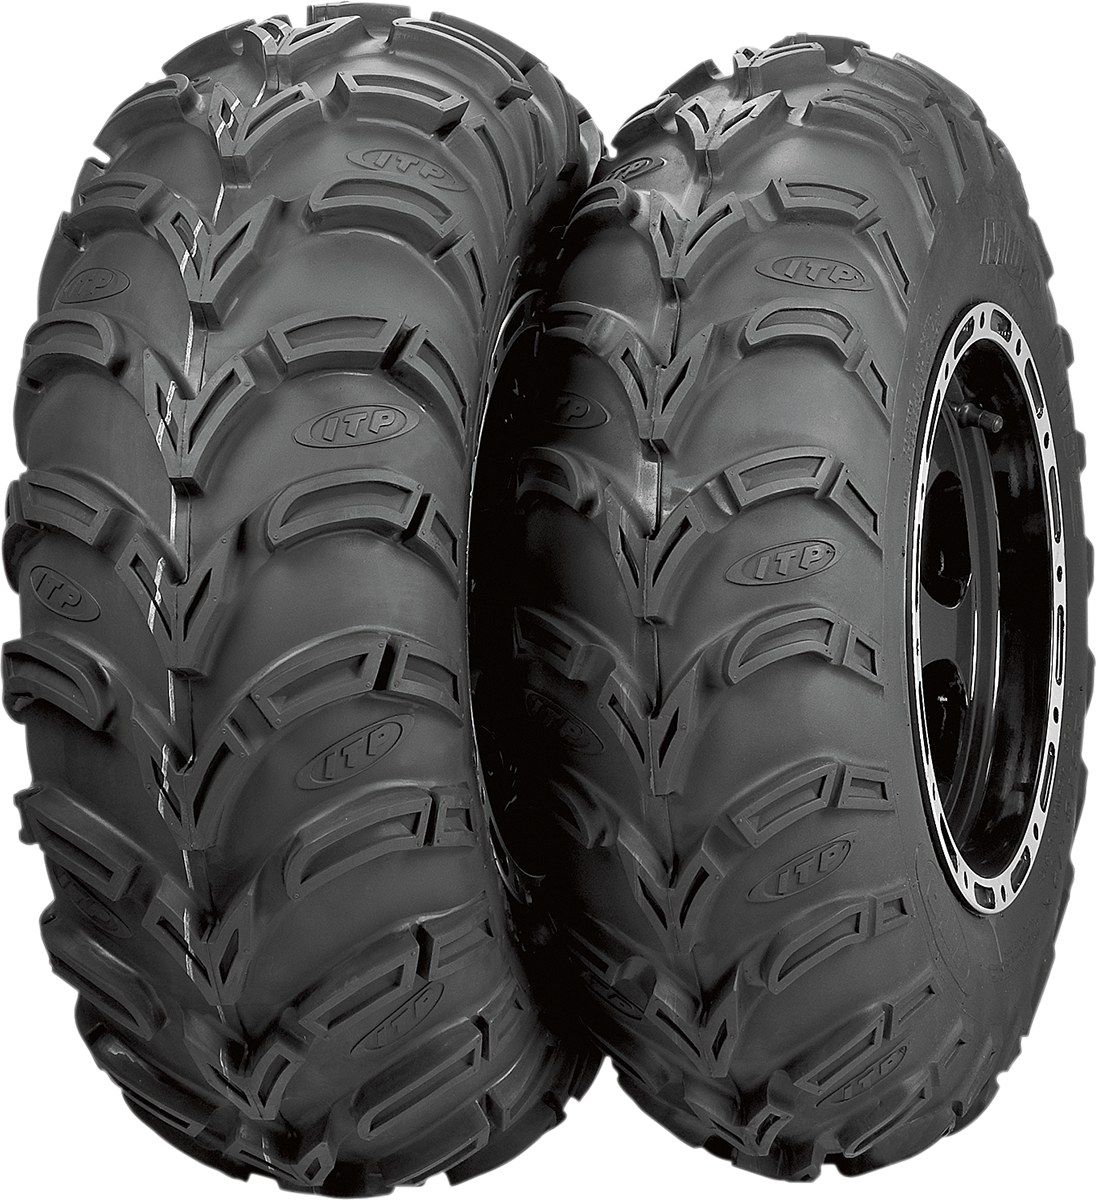 ITP Tire - Mud Lite XL - Front/Rear - 26x12-12 - 6 Ply 56A361